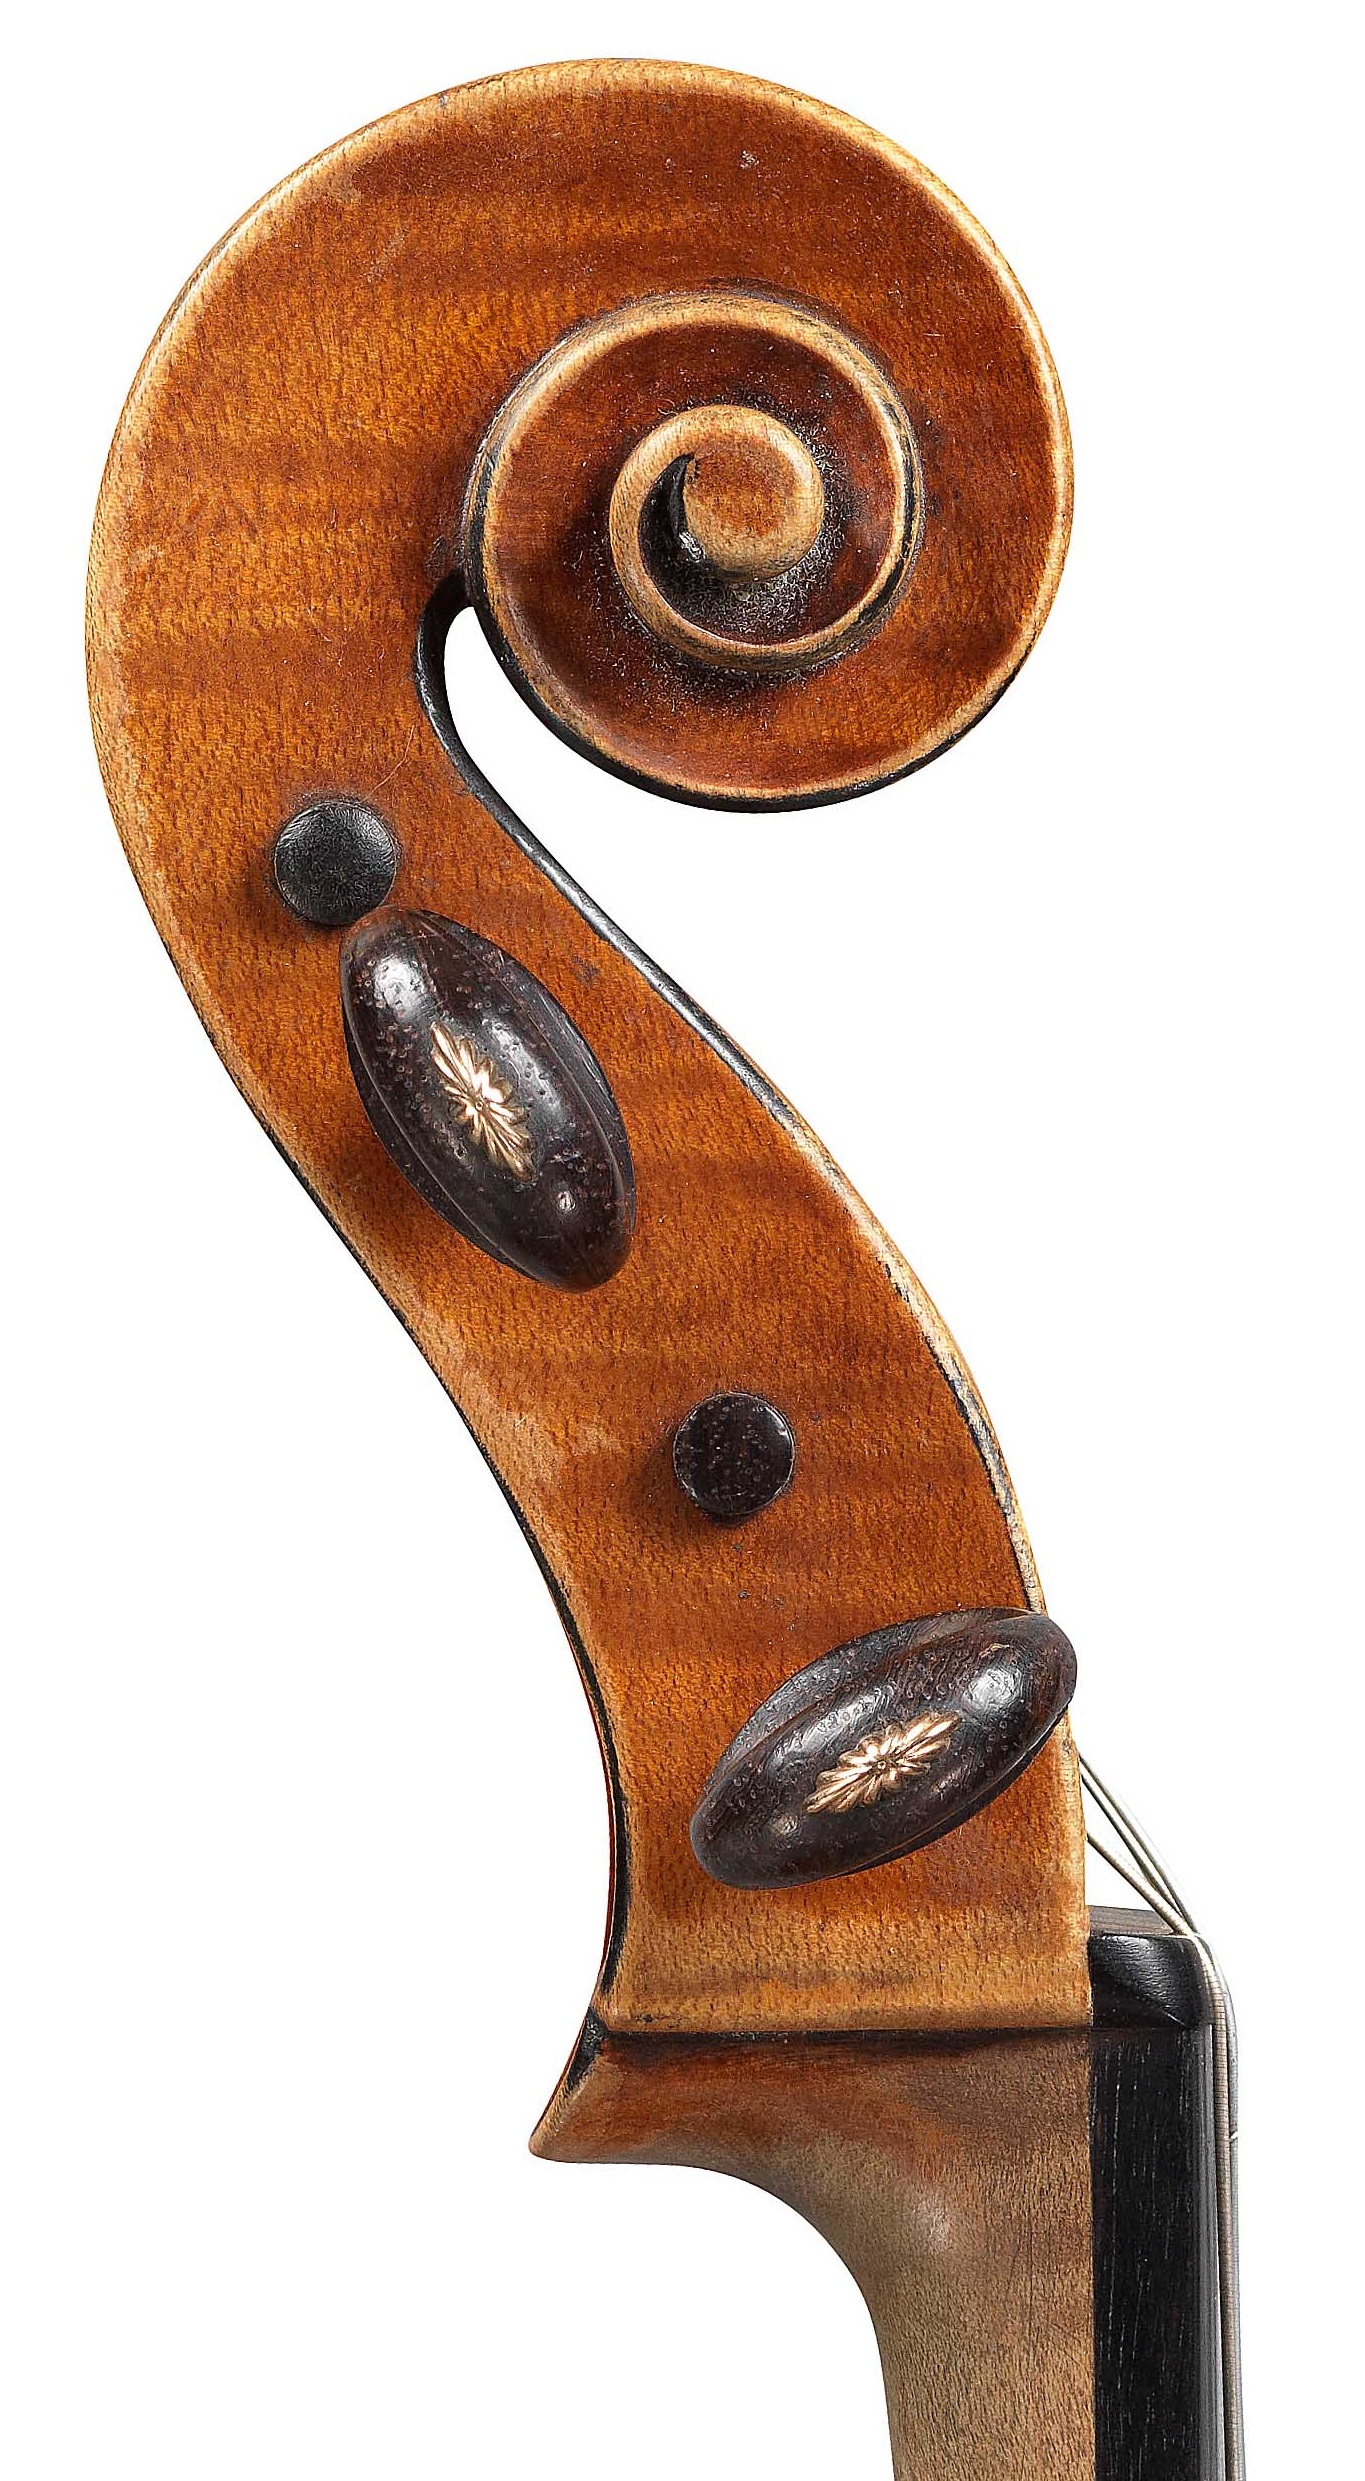 Scroll of viola by JB Vuillaume, dated 1863, exhibited by Ingles & Hayday at Sotheby's in 2012